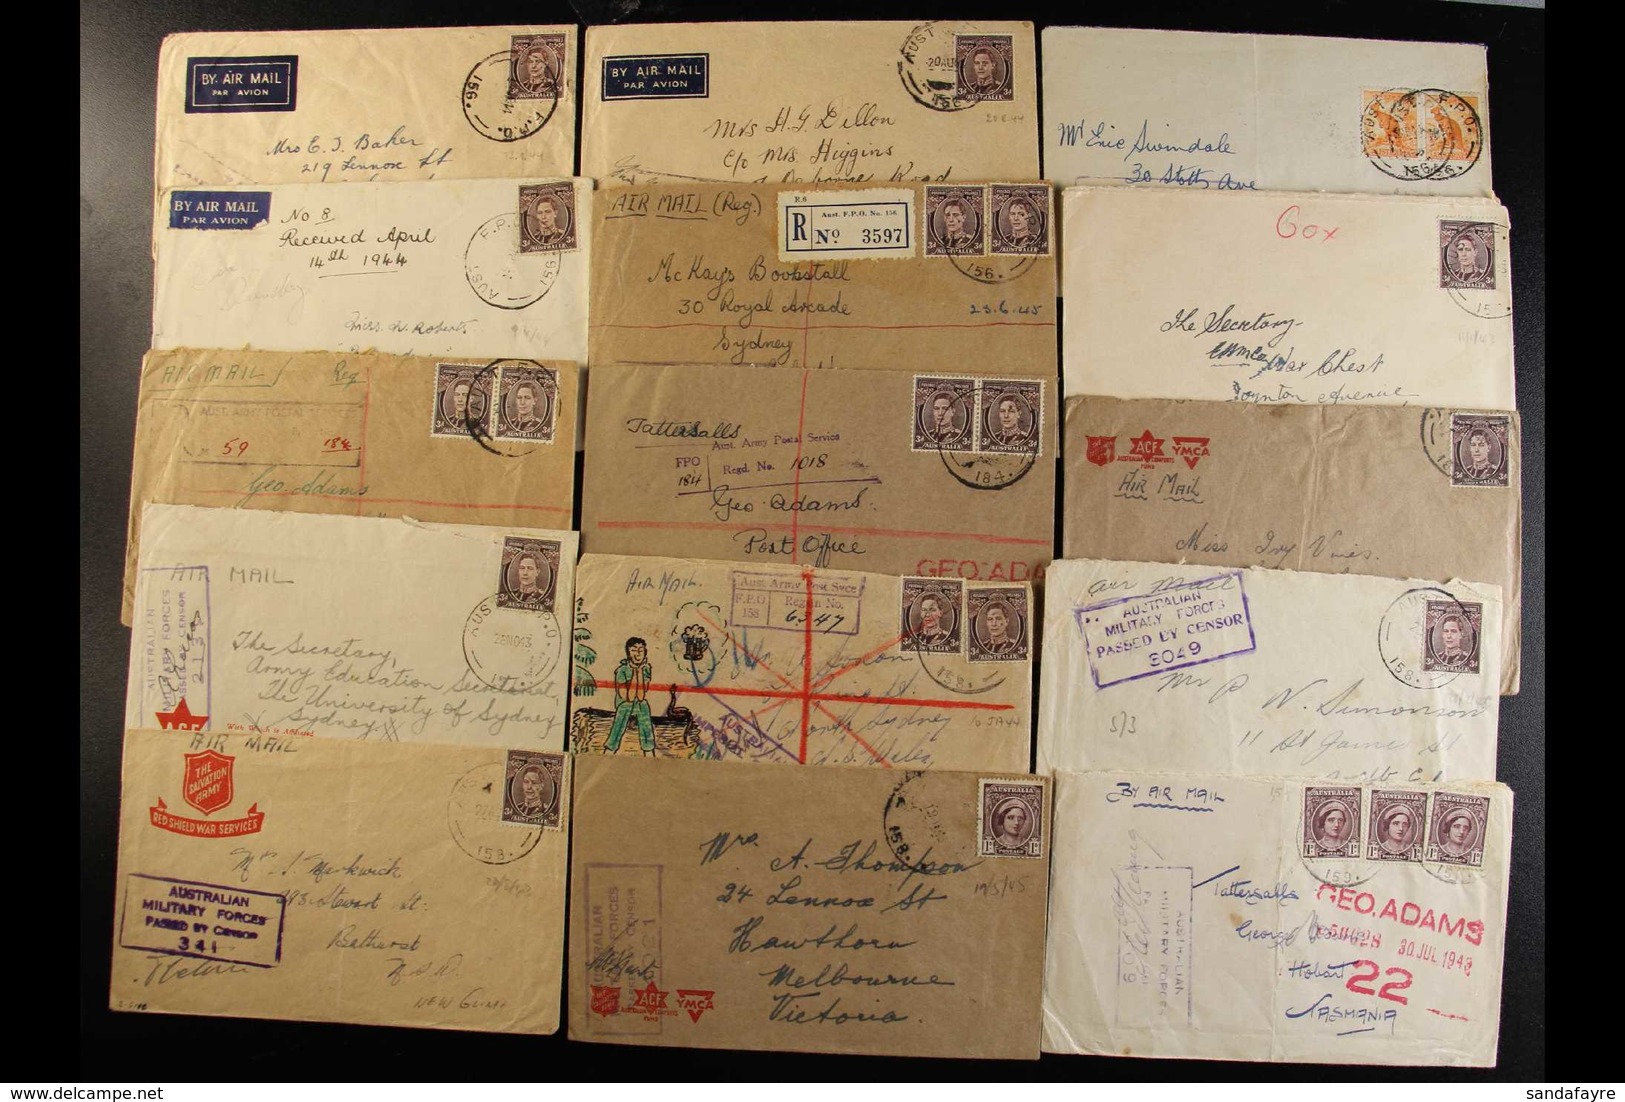 WW2 AUSTRALIAN FORCES - AUST F.P.O. DATESTAMPS A Fine Collection Of Covers Back To Australia, Or One To NZ, Bearing Aust - Papoea-Nieuw-Guinea